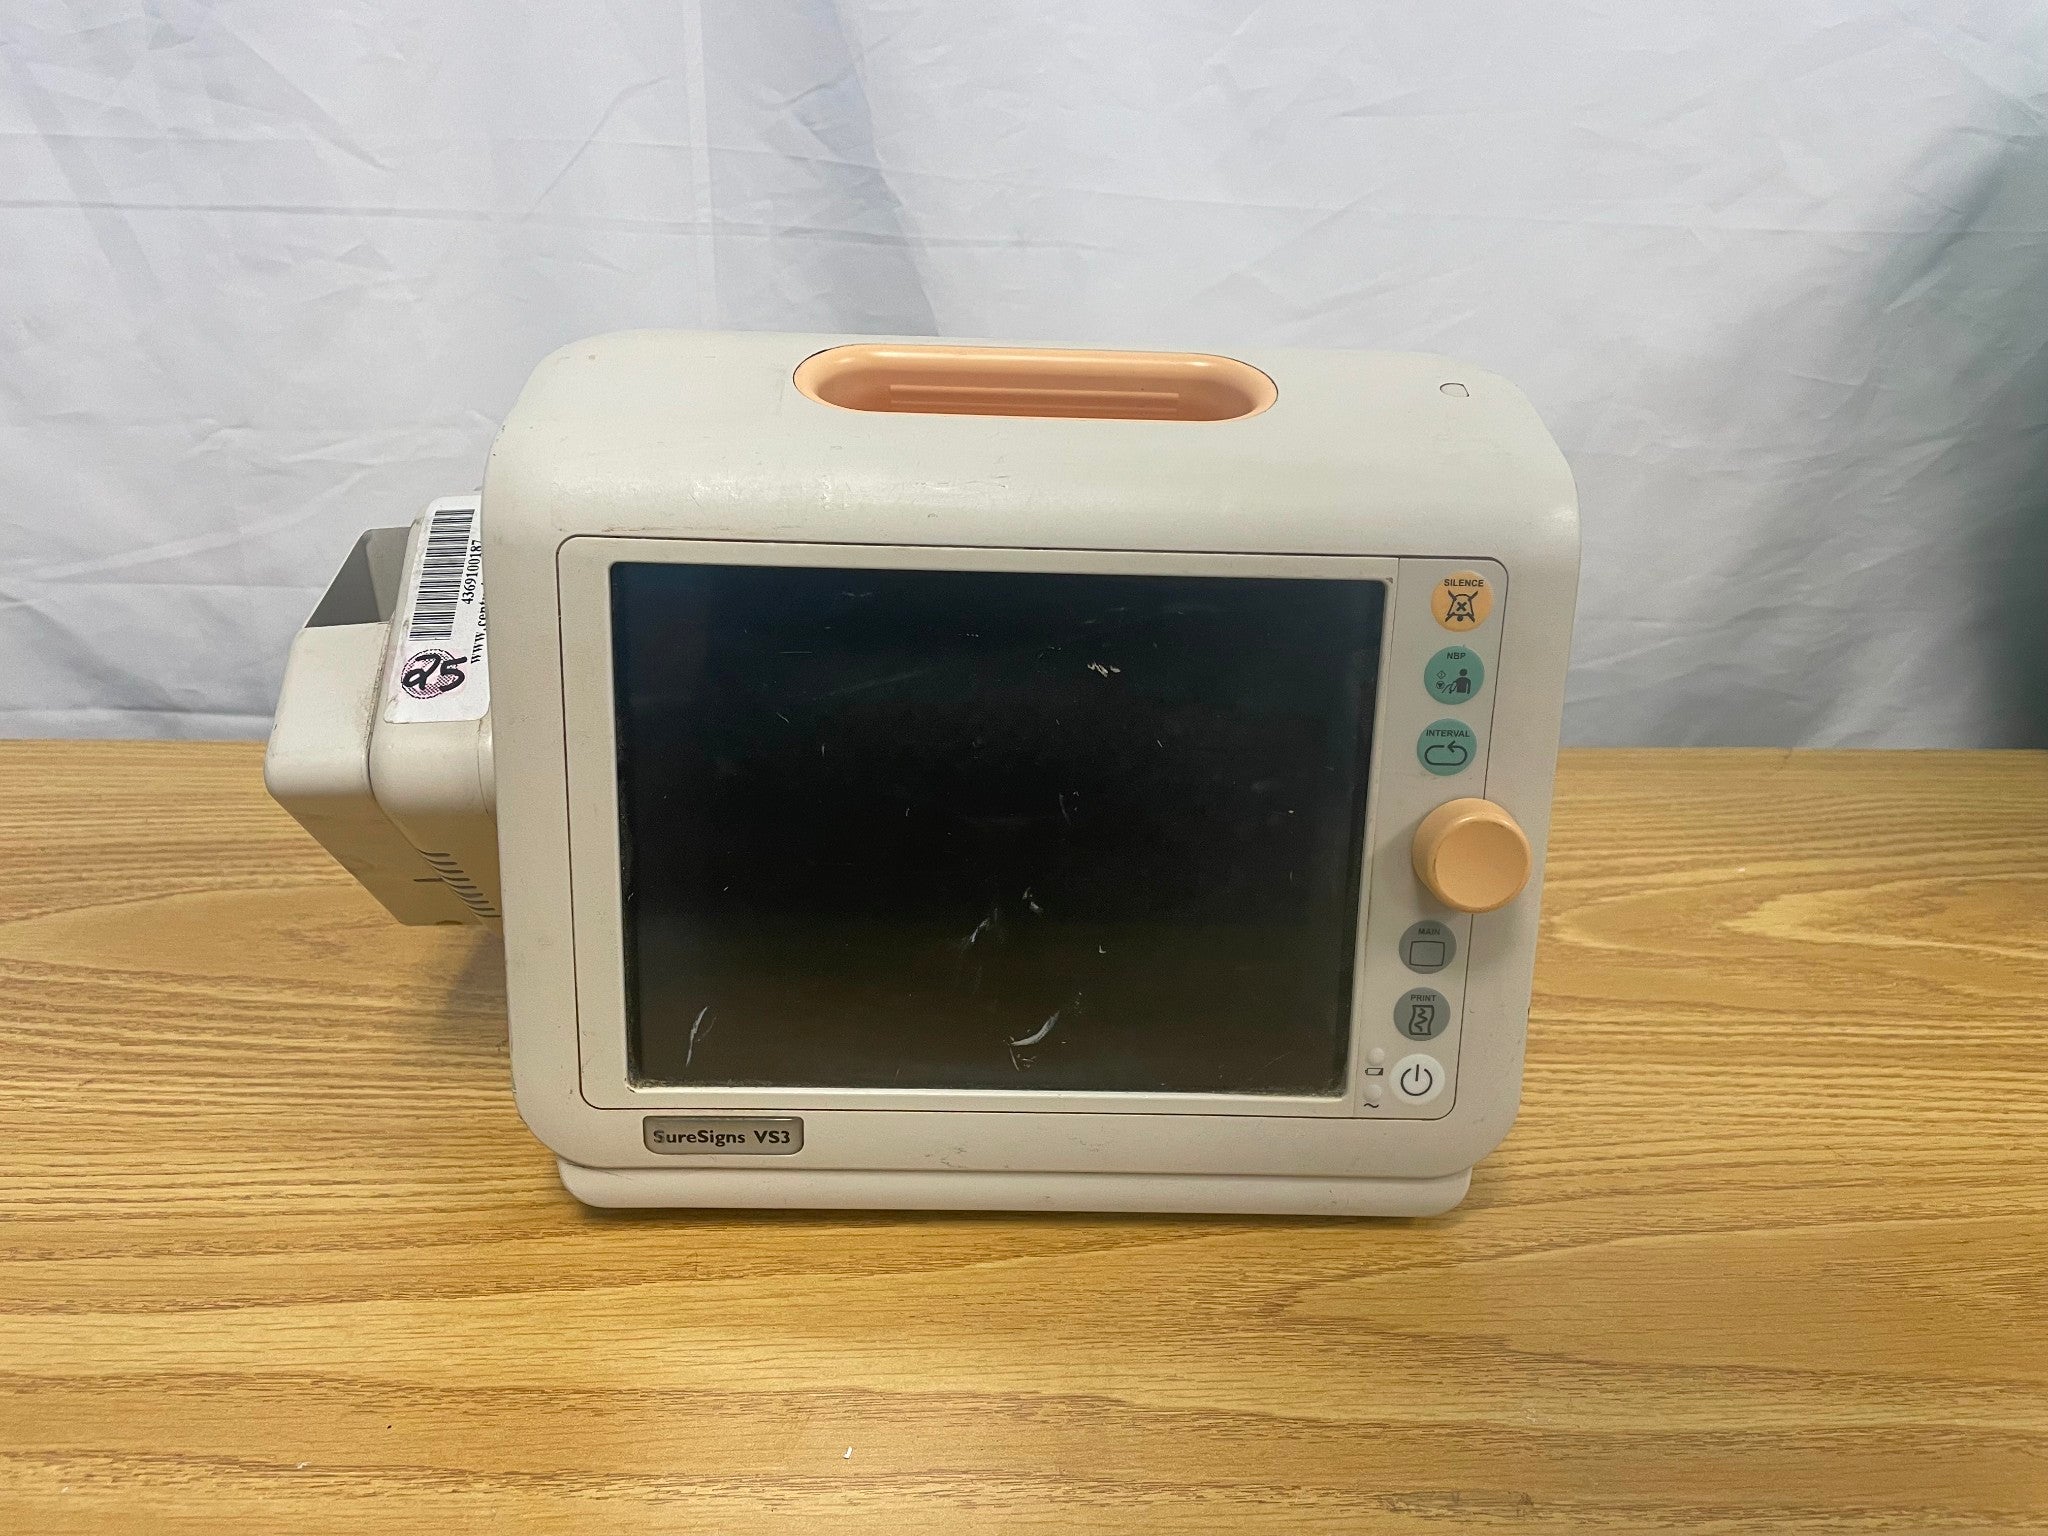 Philips SureSigns VS3 Monitor REF: 863074 DIAGNOSTIC ULTRASOUND MACHINES FOR SALE